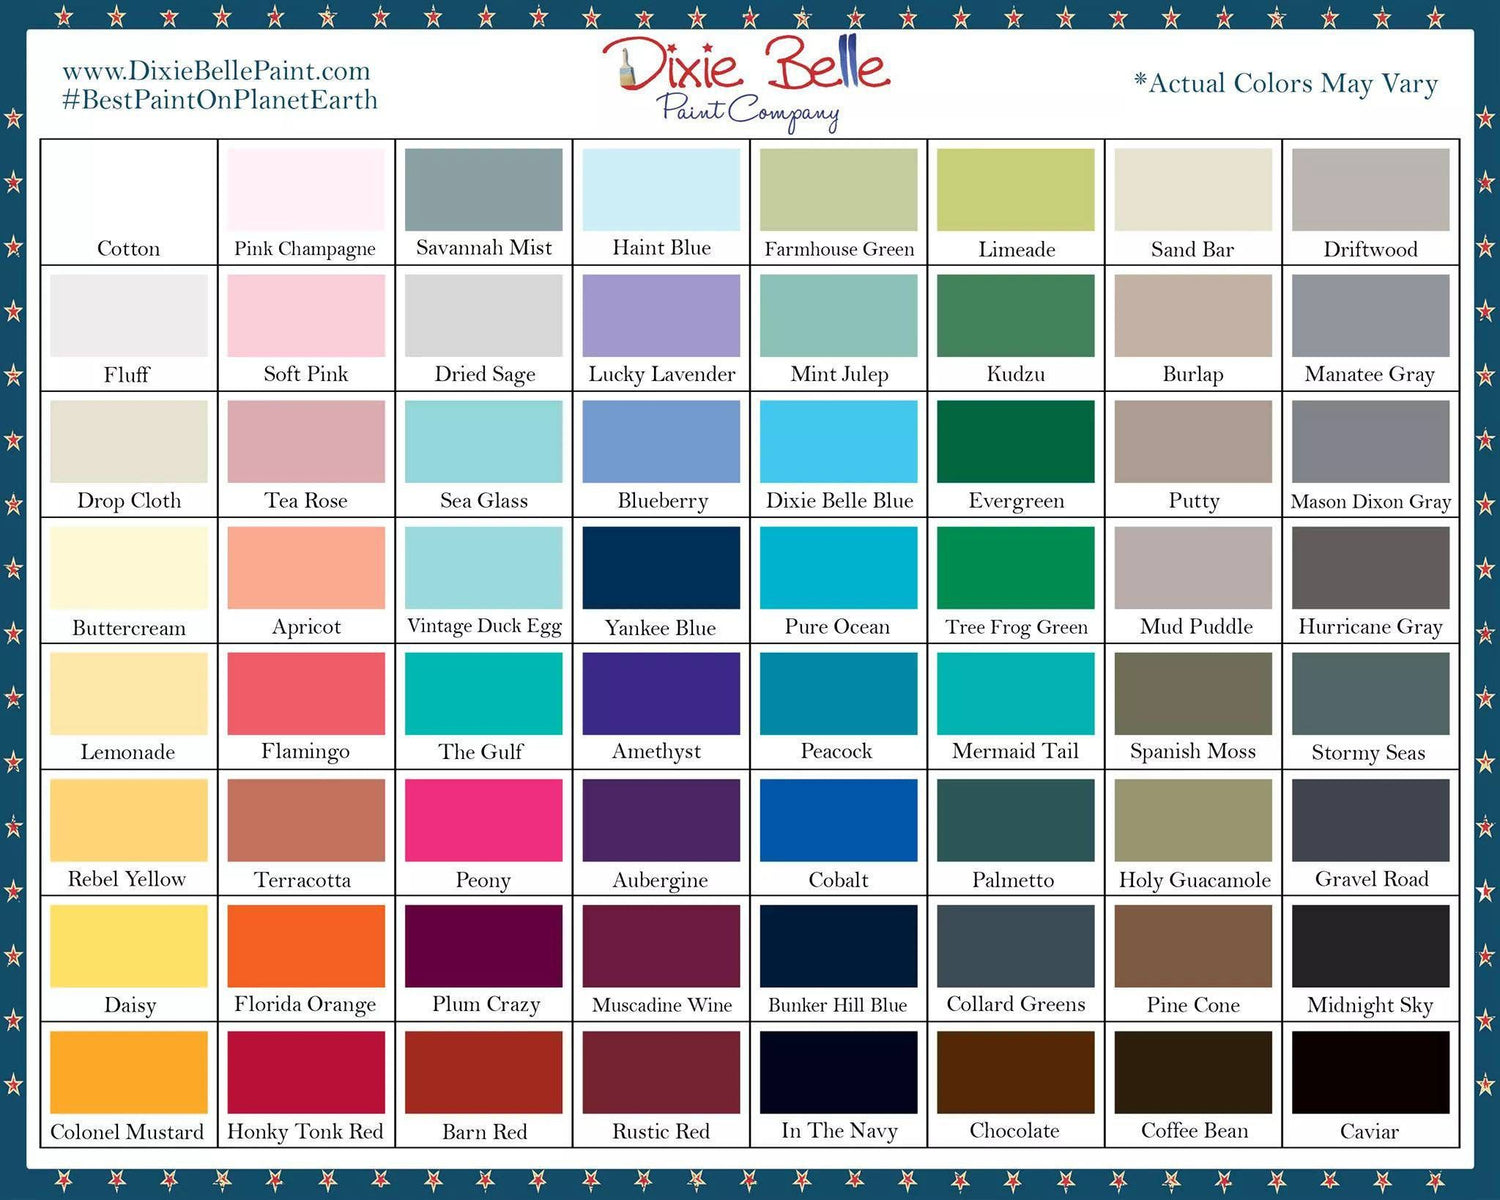 DIXIE BELLE PAINT AND PRODUCTS